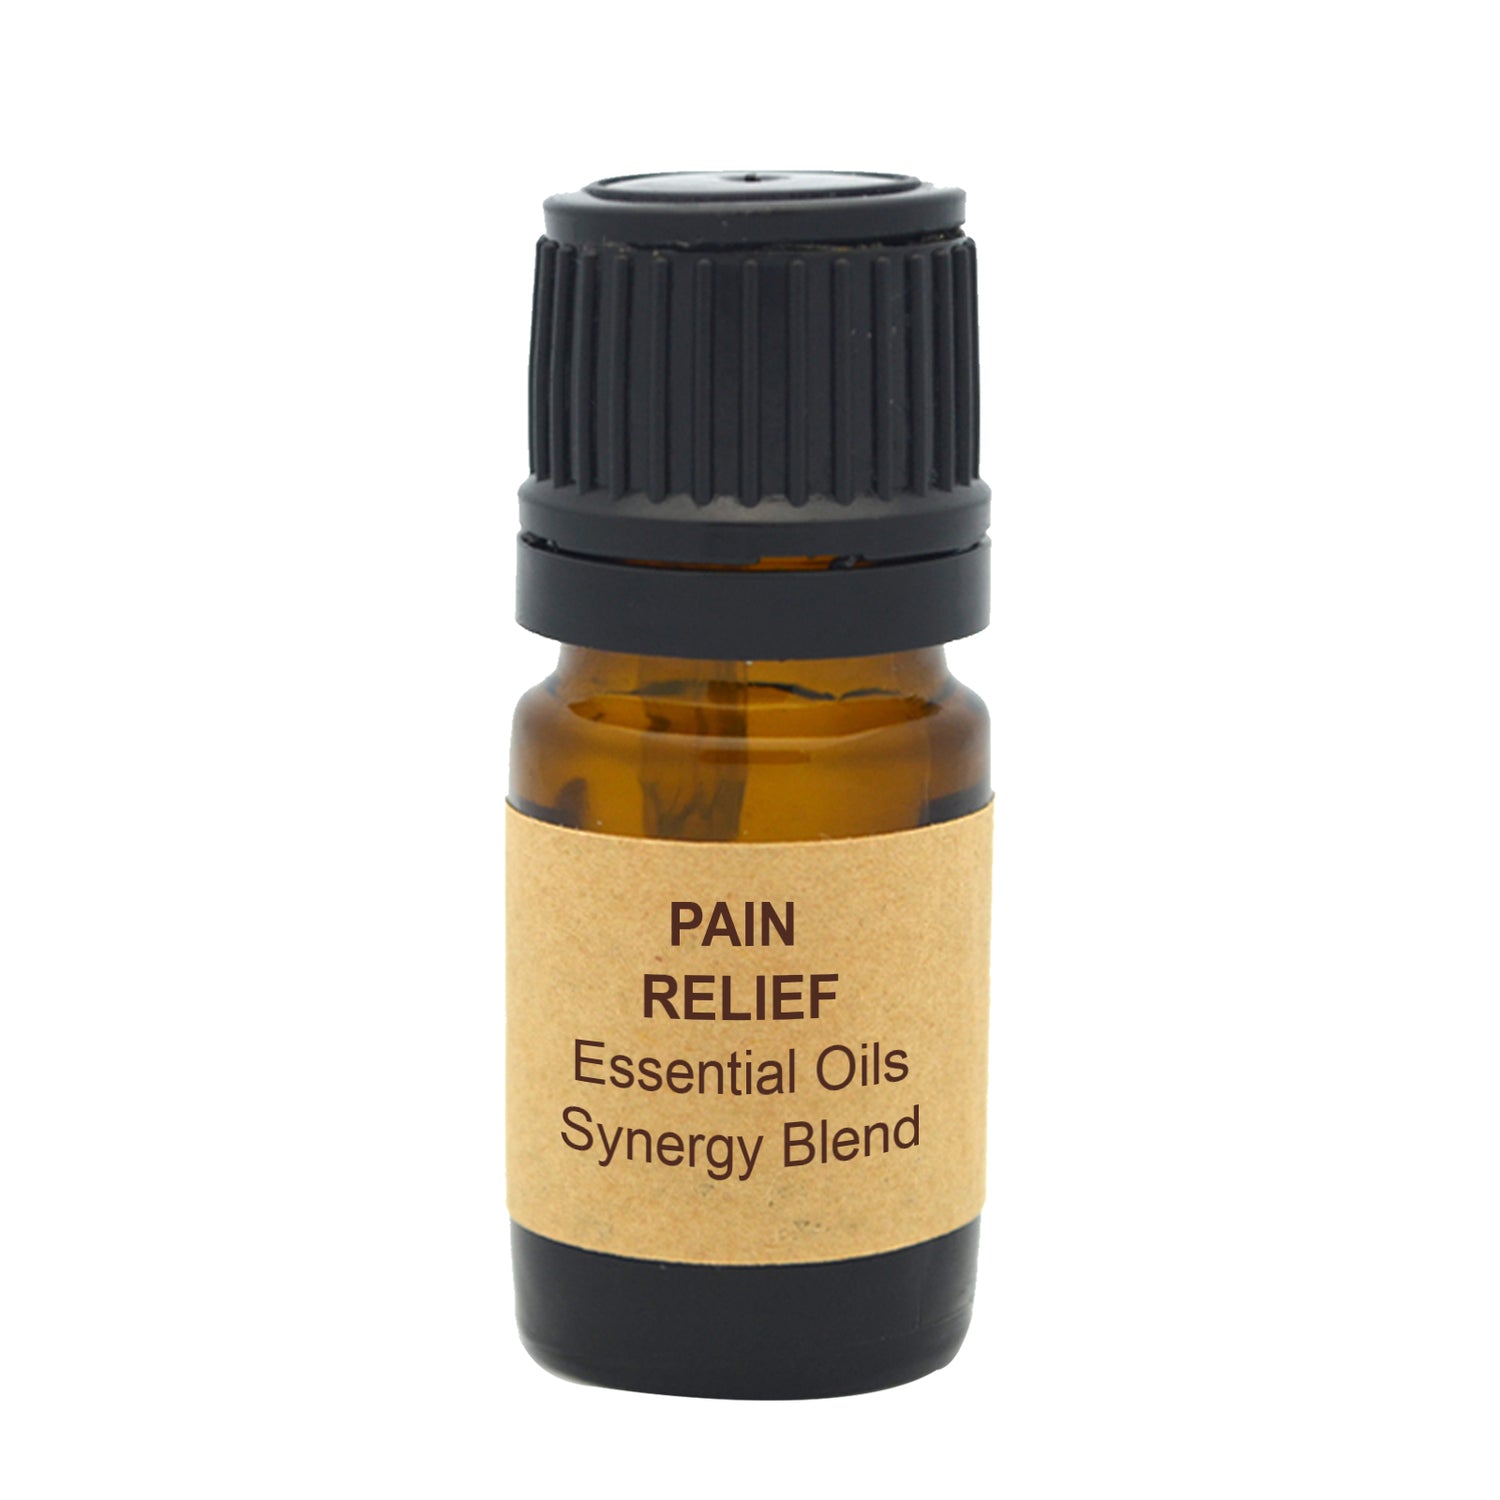 Pain Relief Essential Oils Synergy Blend.